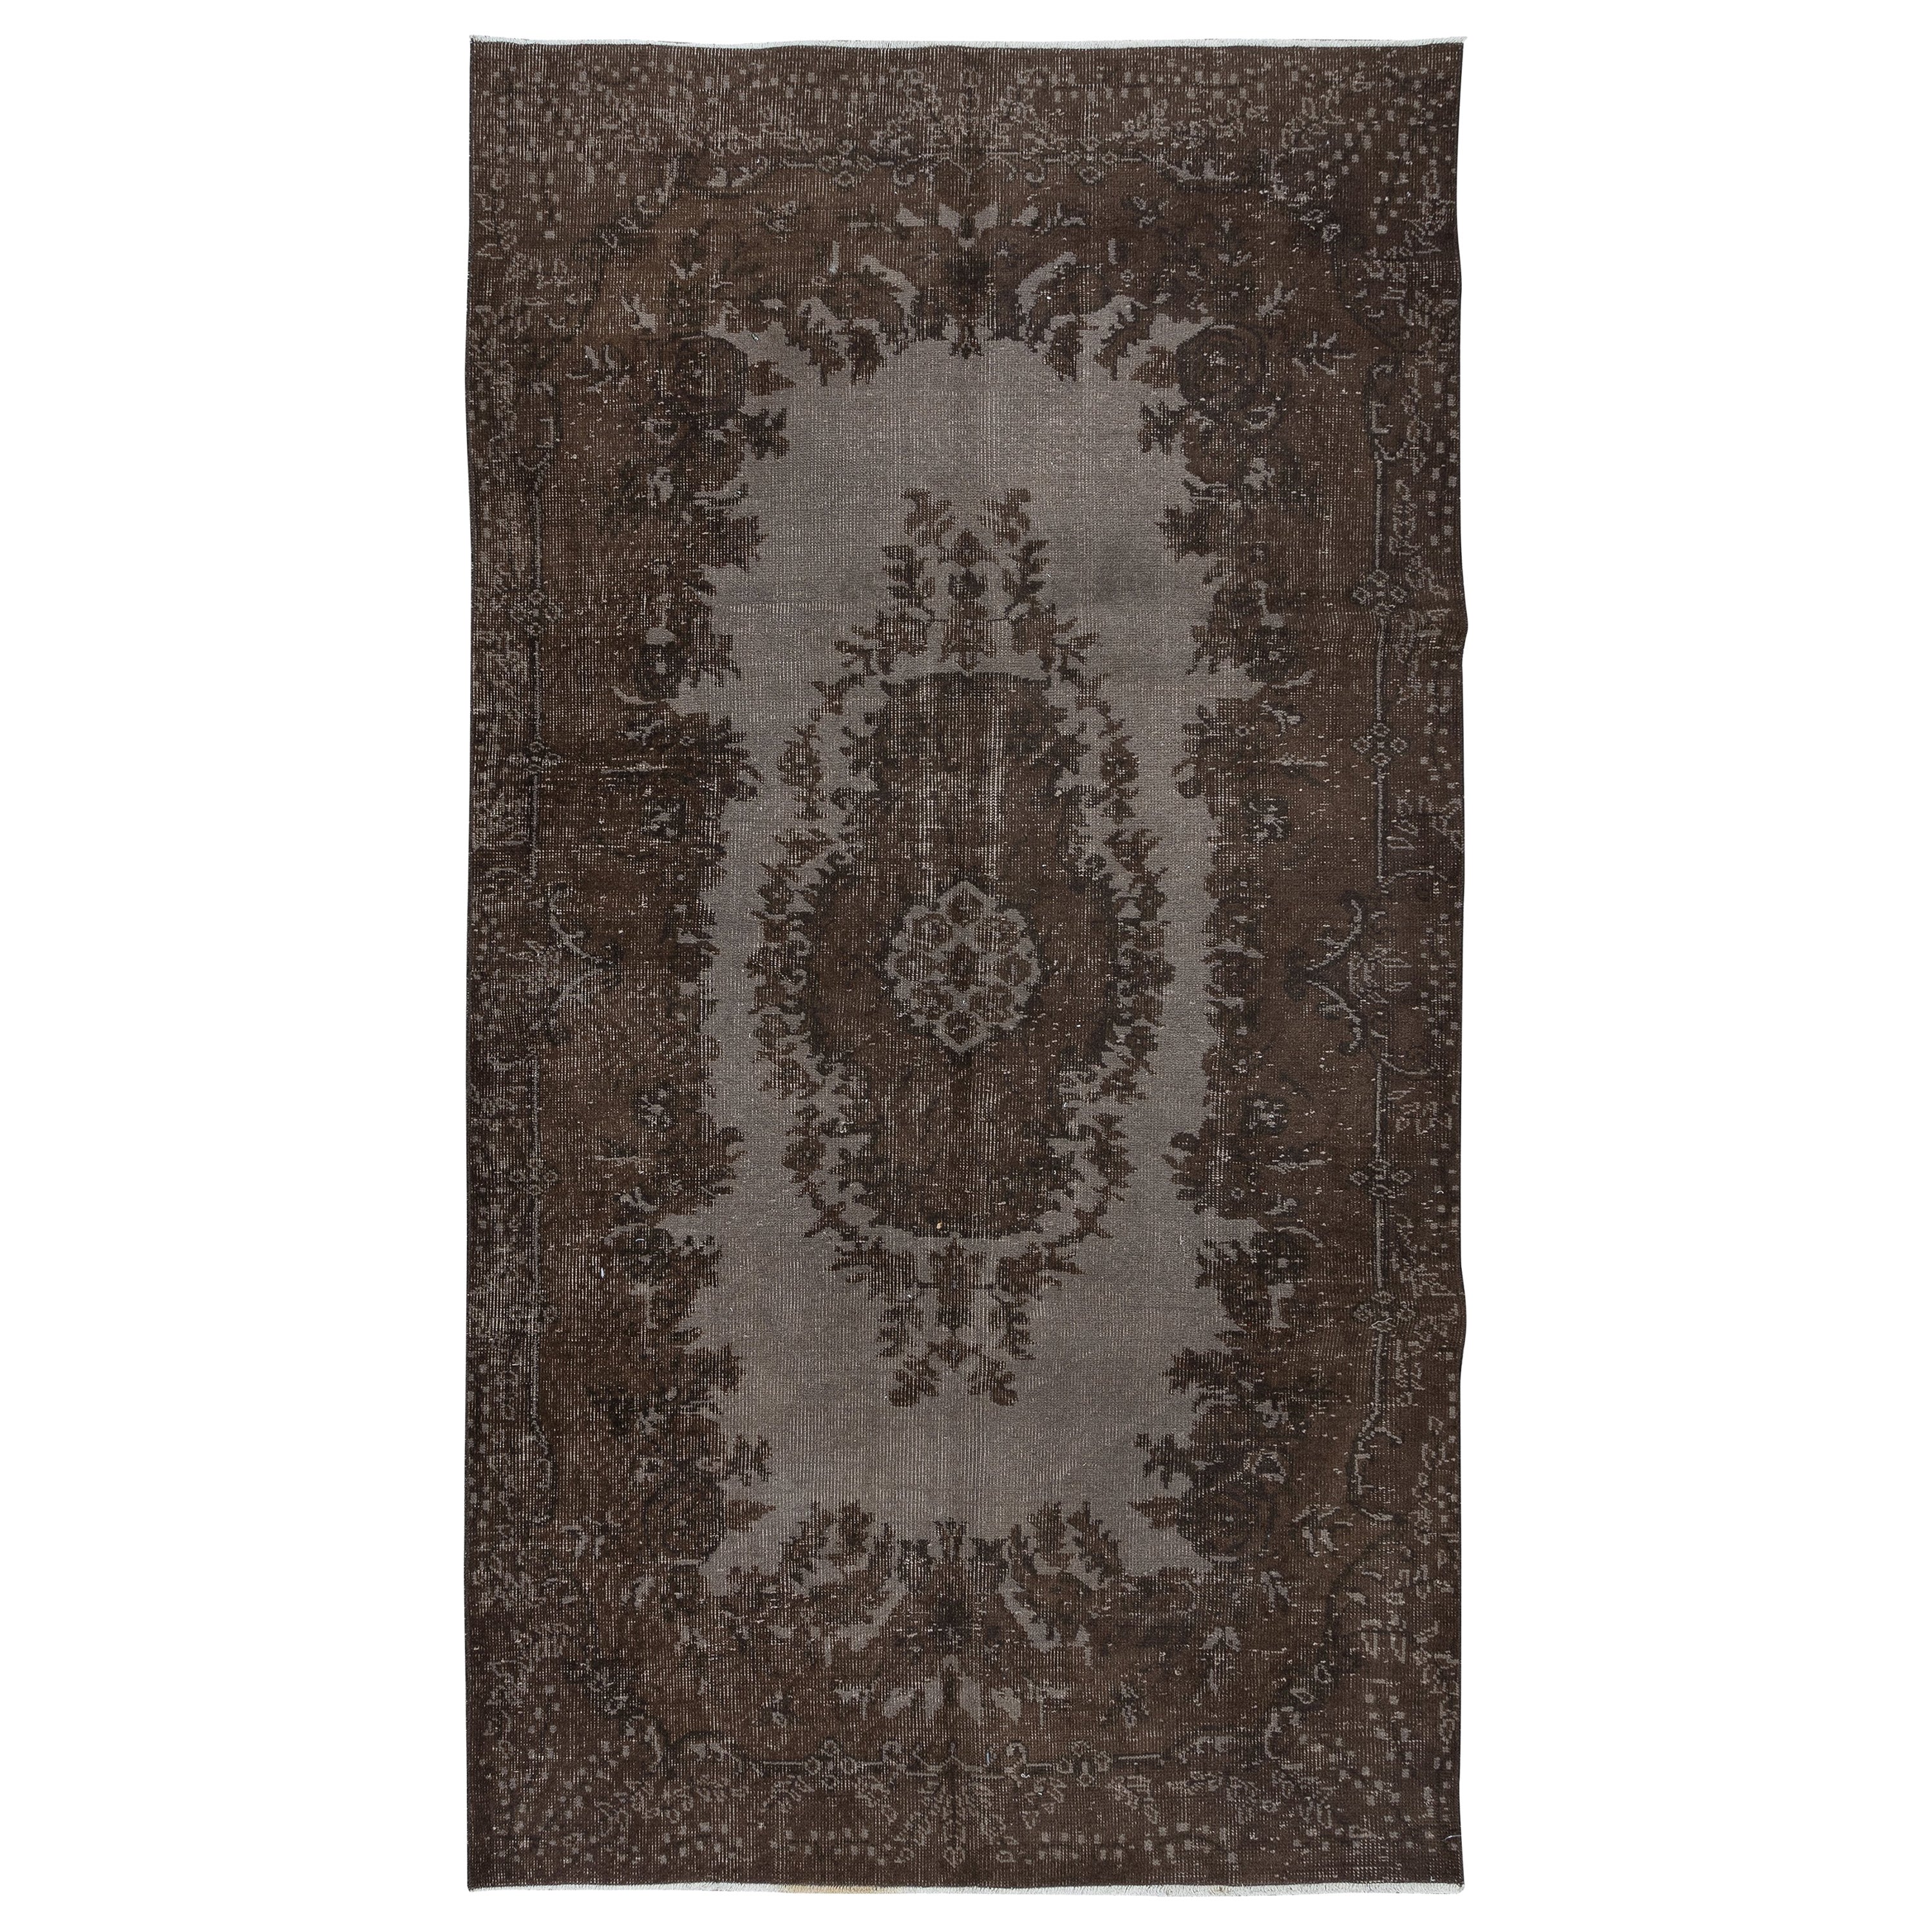 5x8.7 Ft Handmade Turkish Rug in Brown, Modern Home Decor Carpet with Medallion For Sale